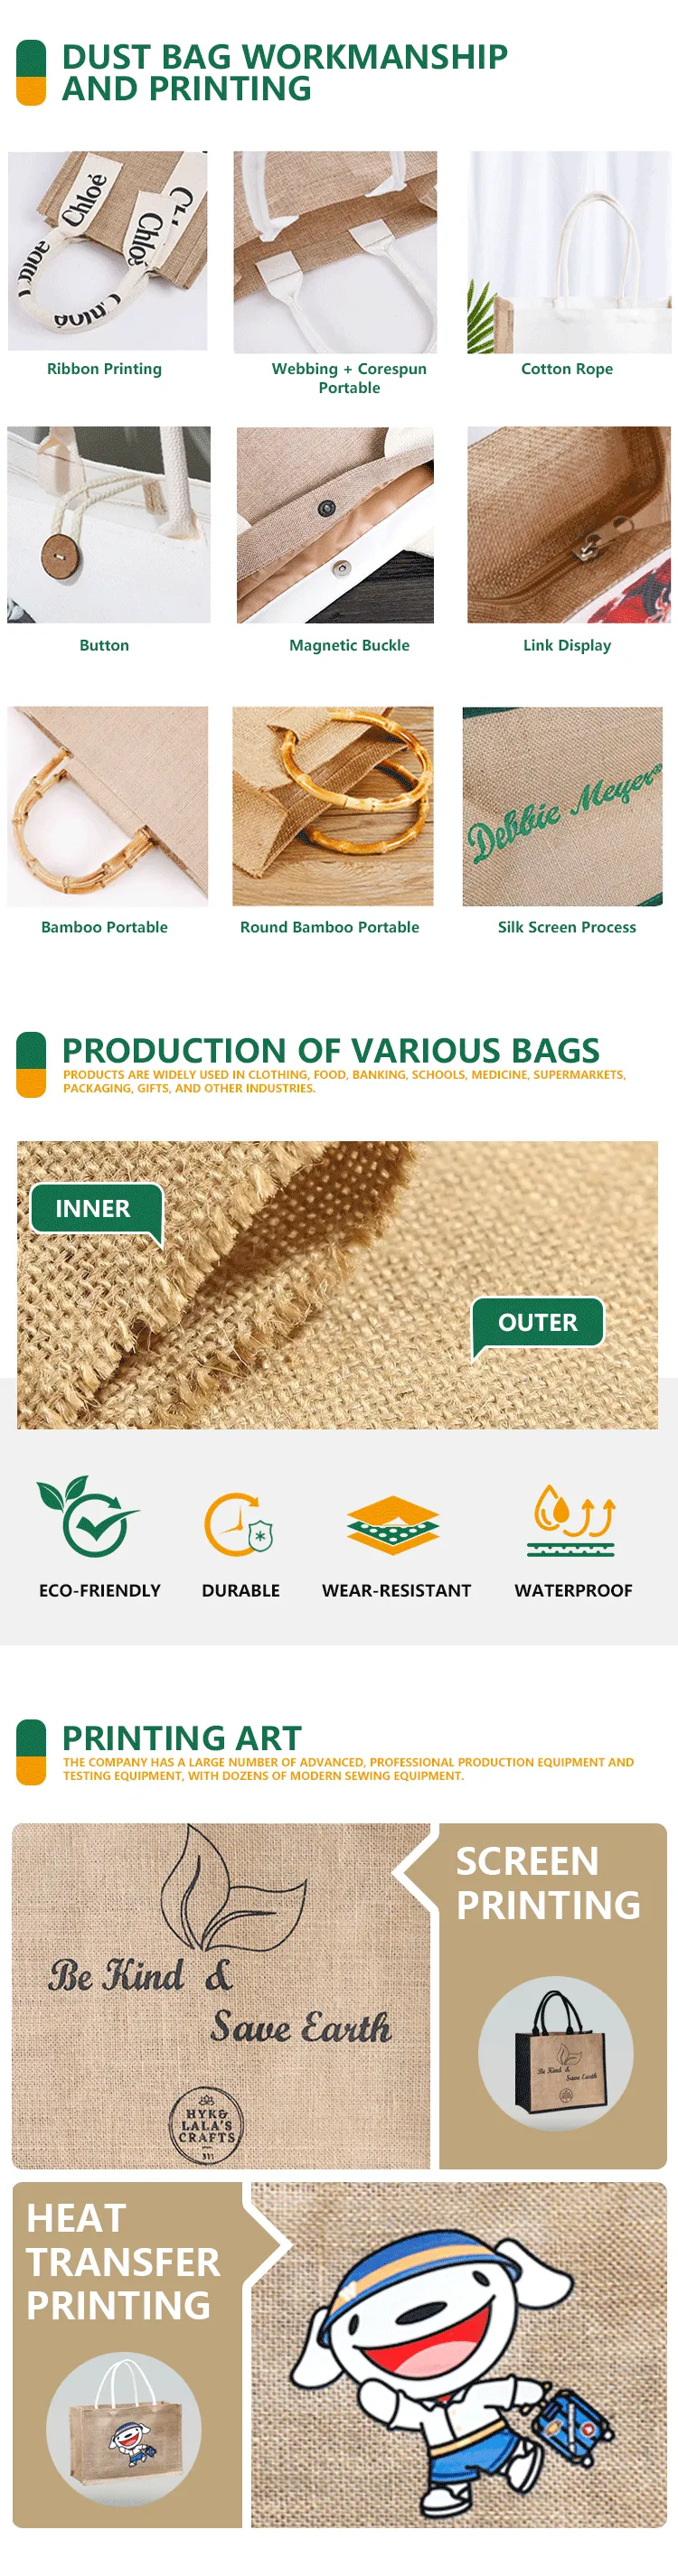 jute bags for sale